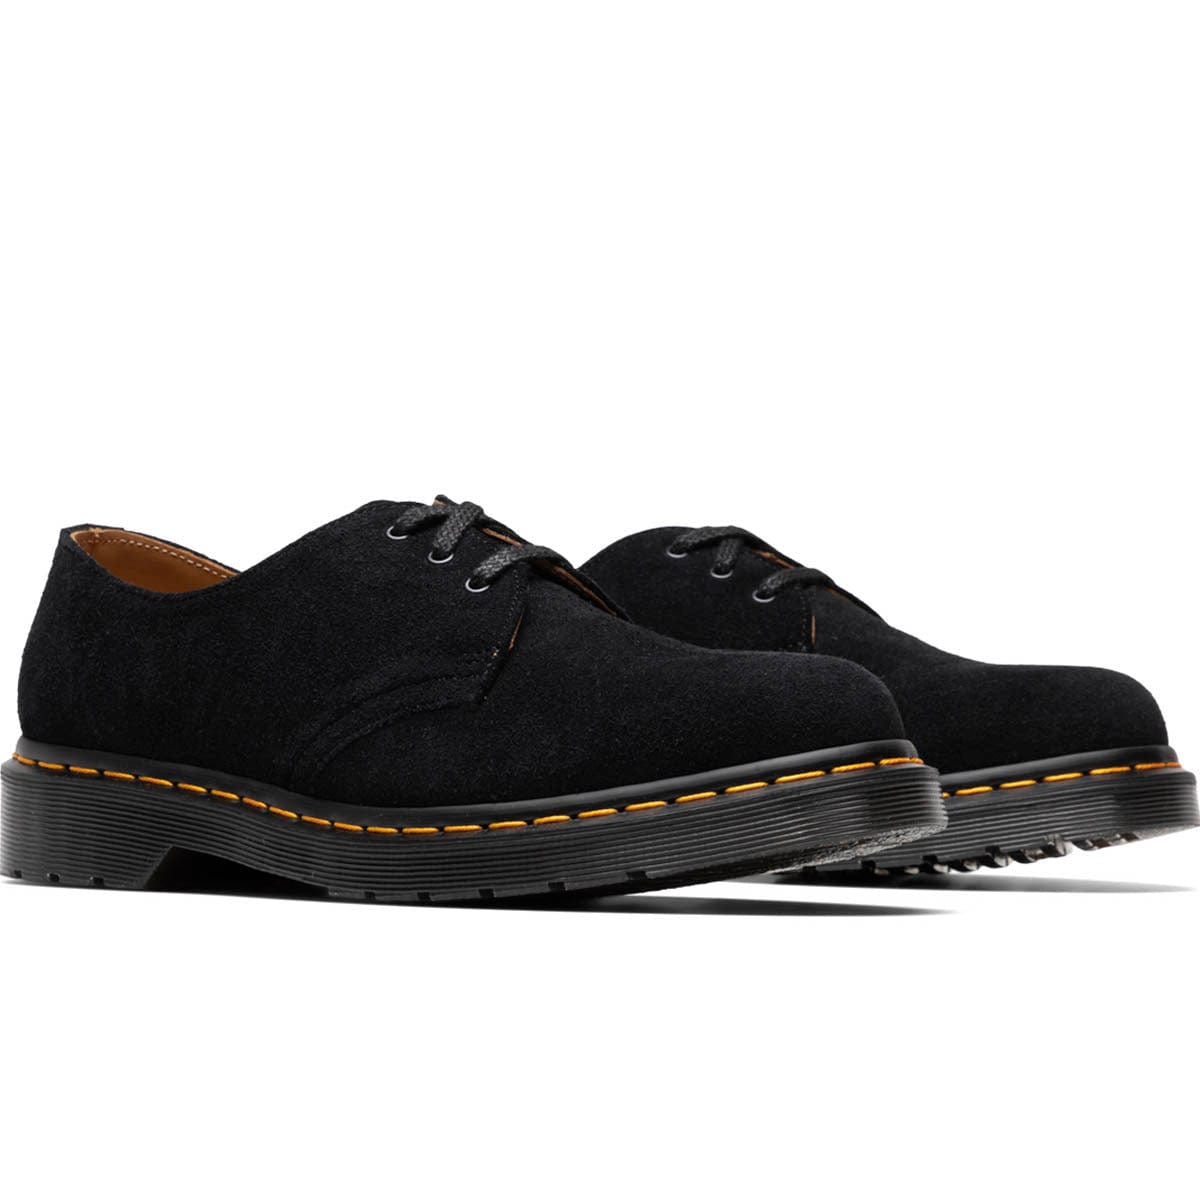 Dr. Martens casual 1461